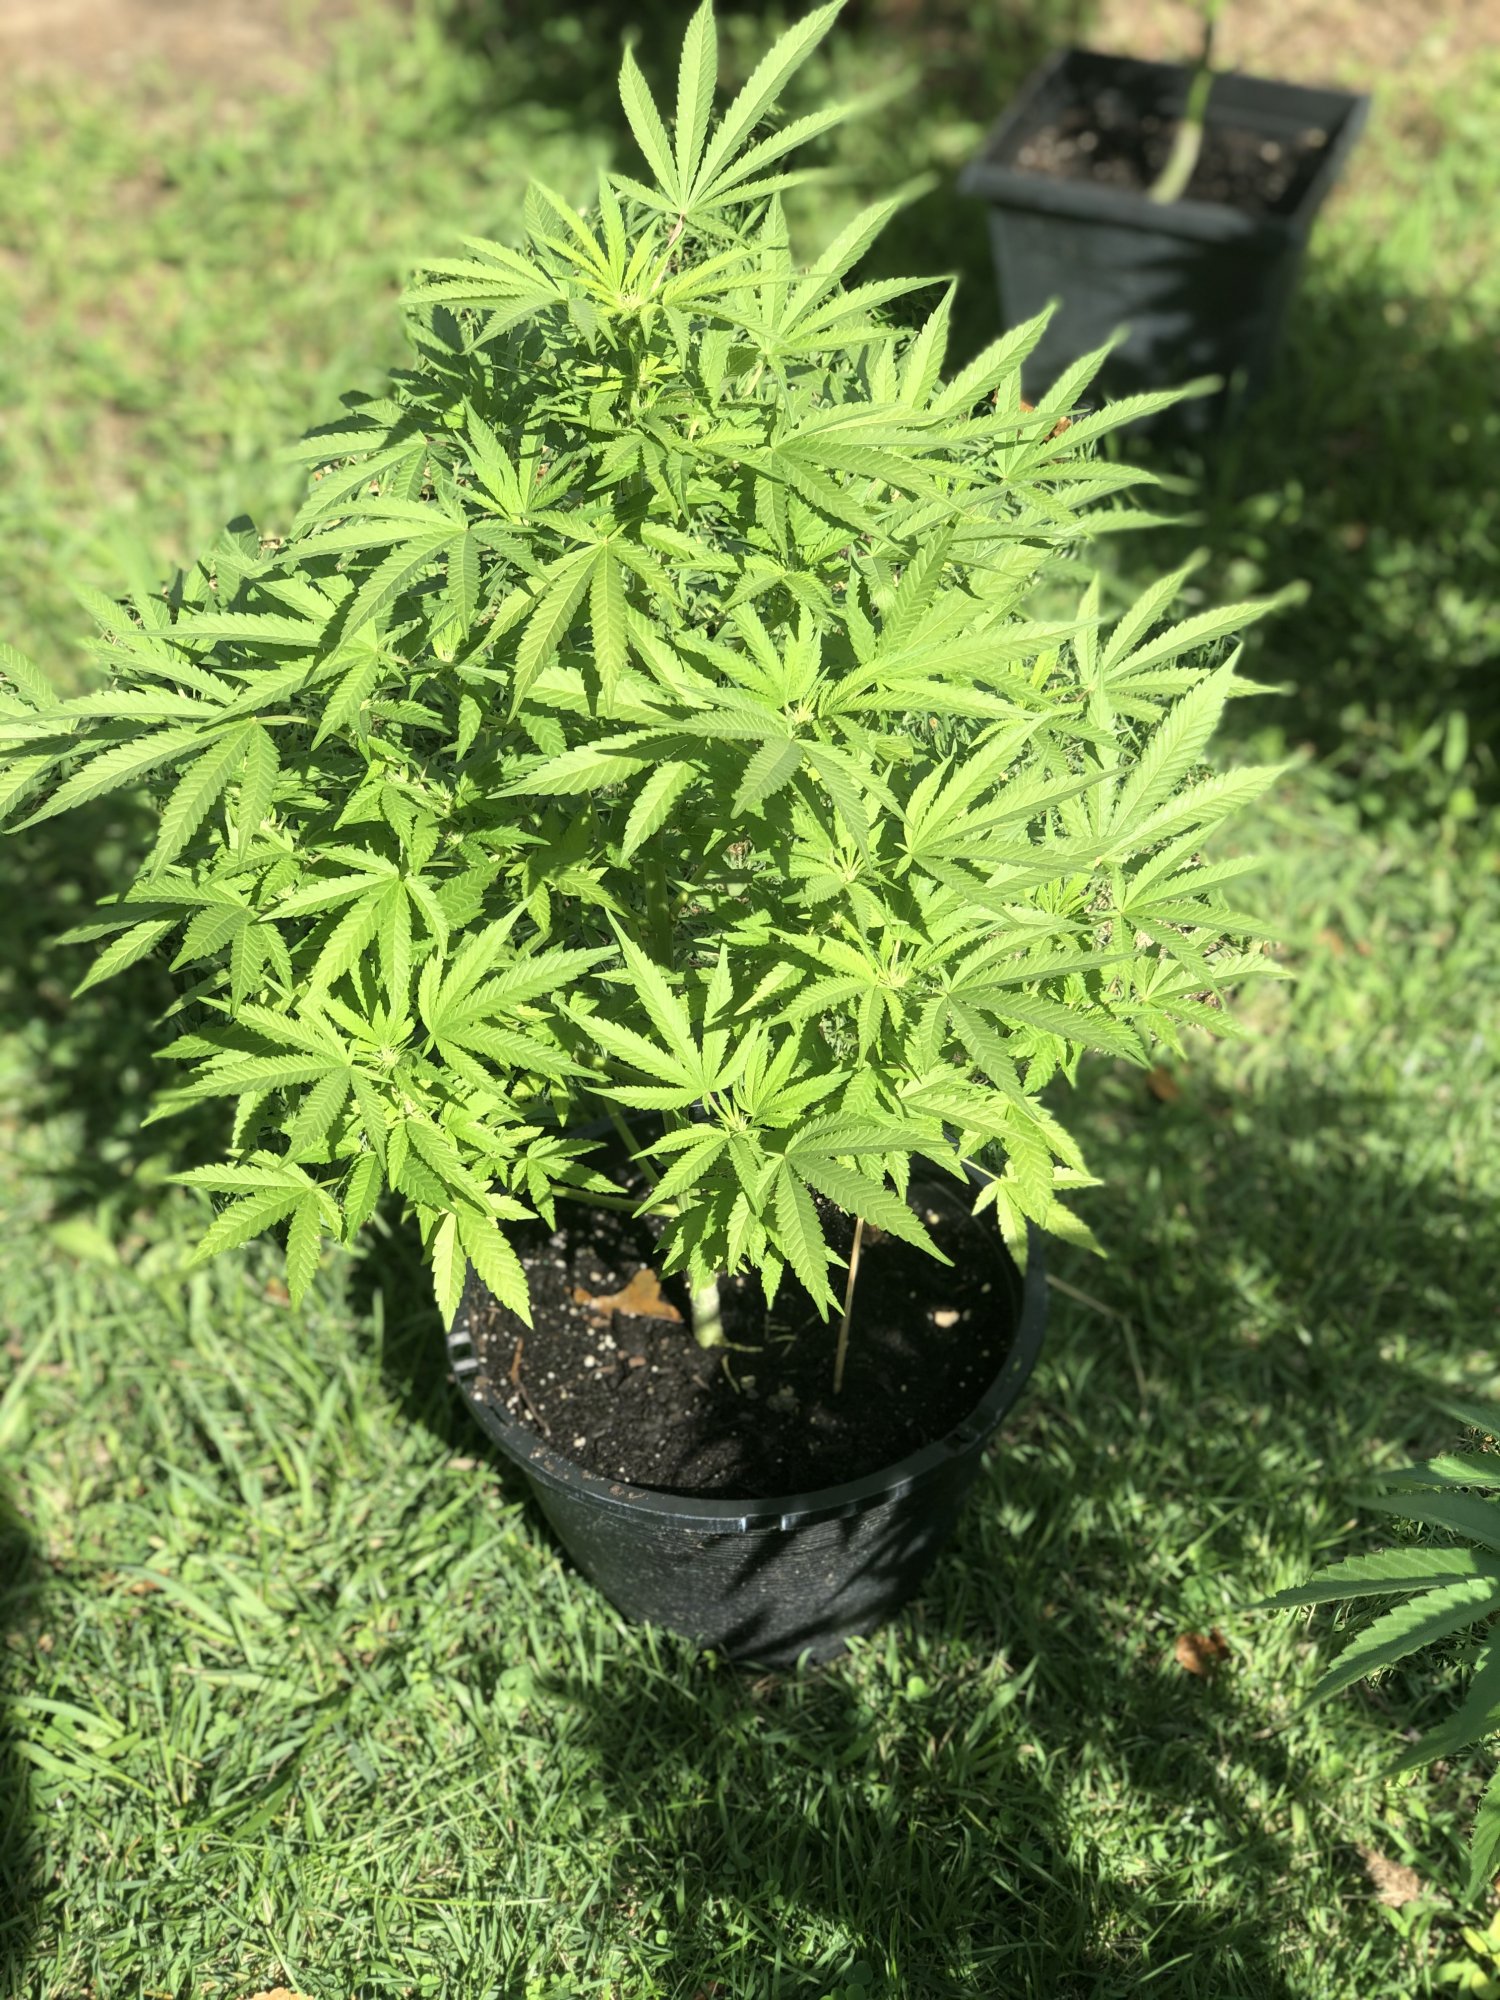 First time outdoor still learning any tips or advise greatly appreciated 7